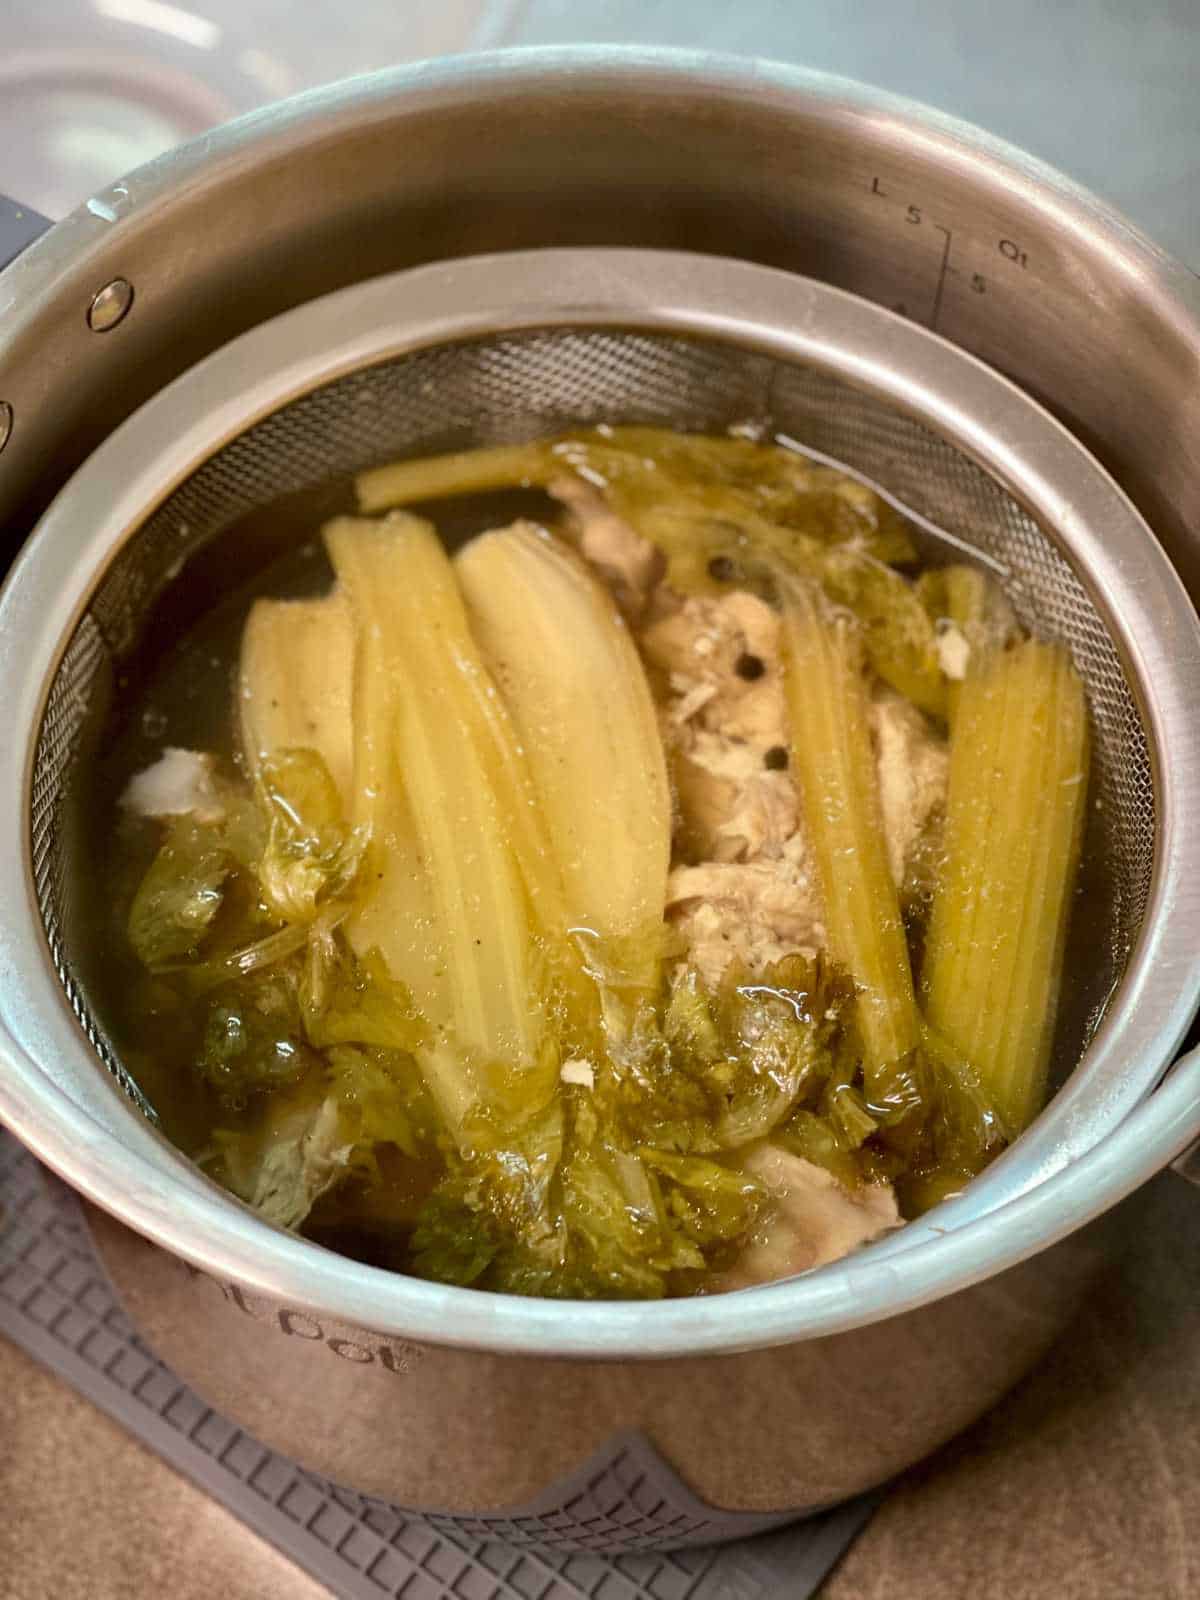 Pressure cooked turkey stock seen from above inside the stainless steel inner pot of an electric pressure cooker (Instant Pot)